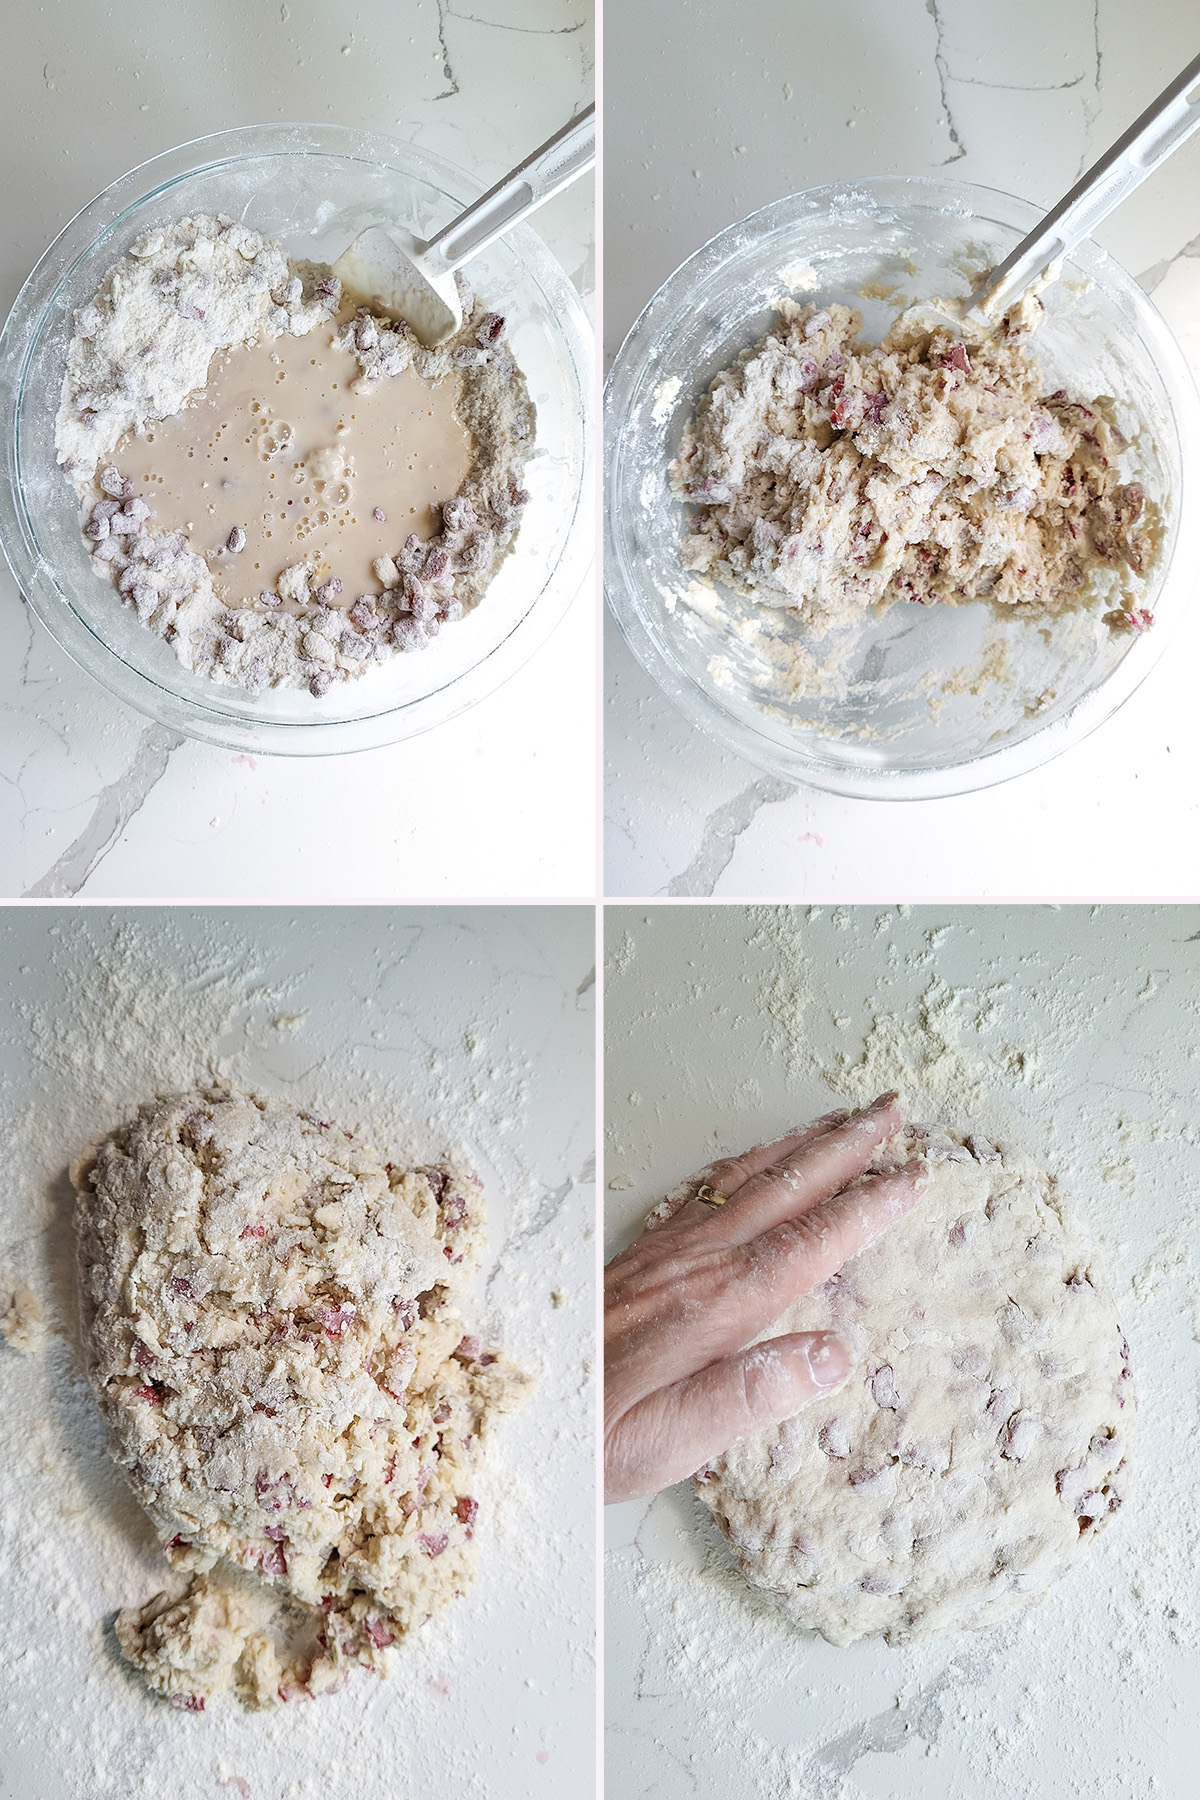 Mixing rhubarb scone dough and forming into a disc.